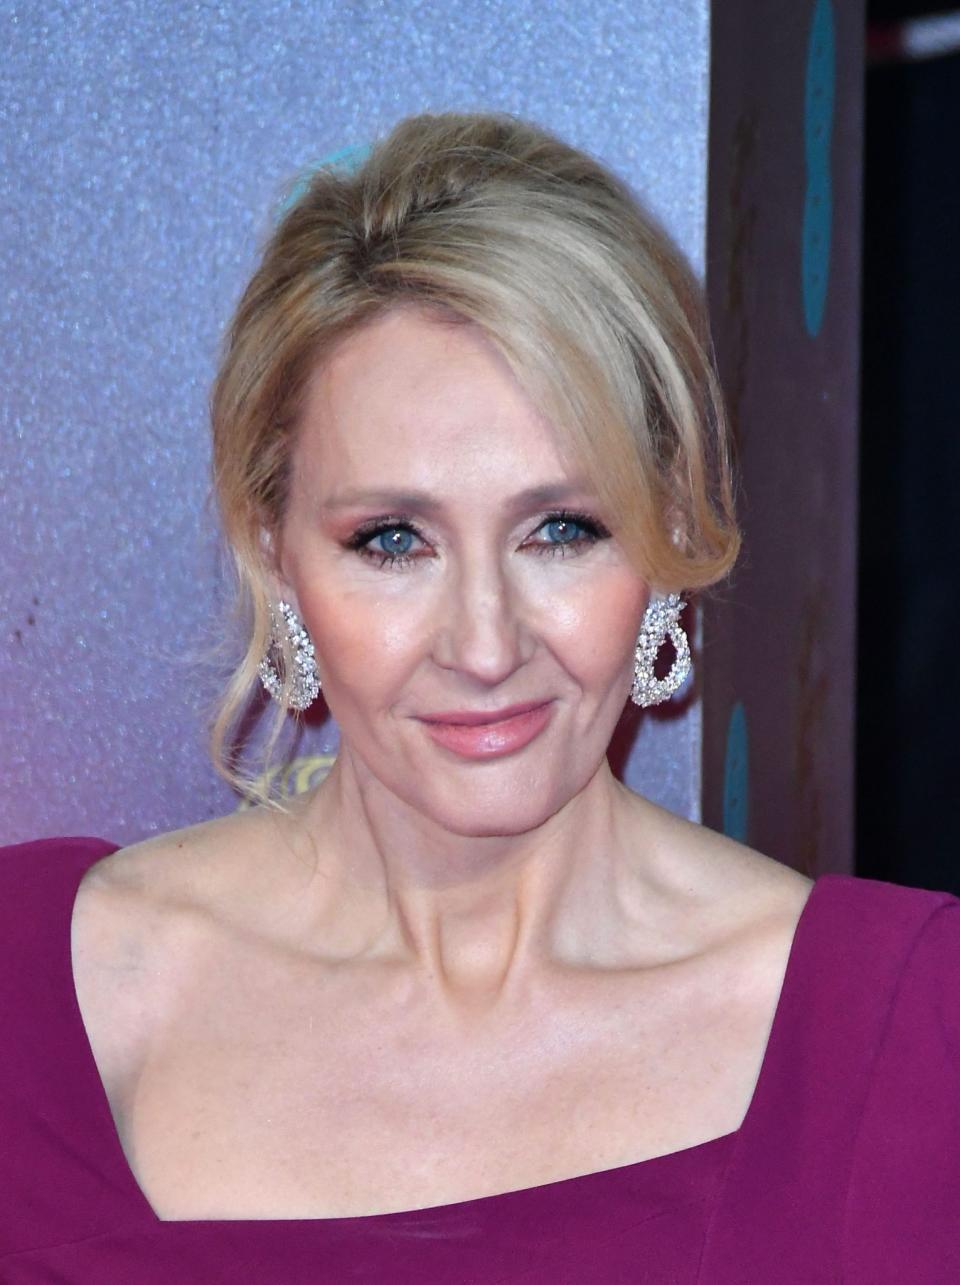 <p>No. 3: J.K. Rowling<br> The Harry Potter author penned the best-selling book of 2016 (Harry Potter and the Cursed Child) and also co-wrote the stage play. She raked in $95 million.<br> (Nils Jorgensen/Shutterstock) </p>